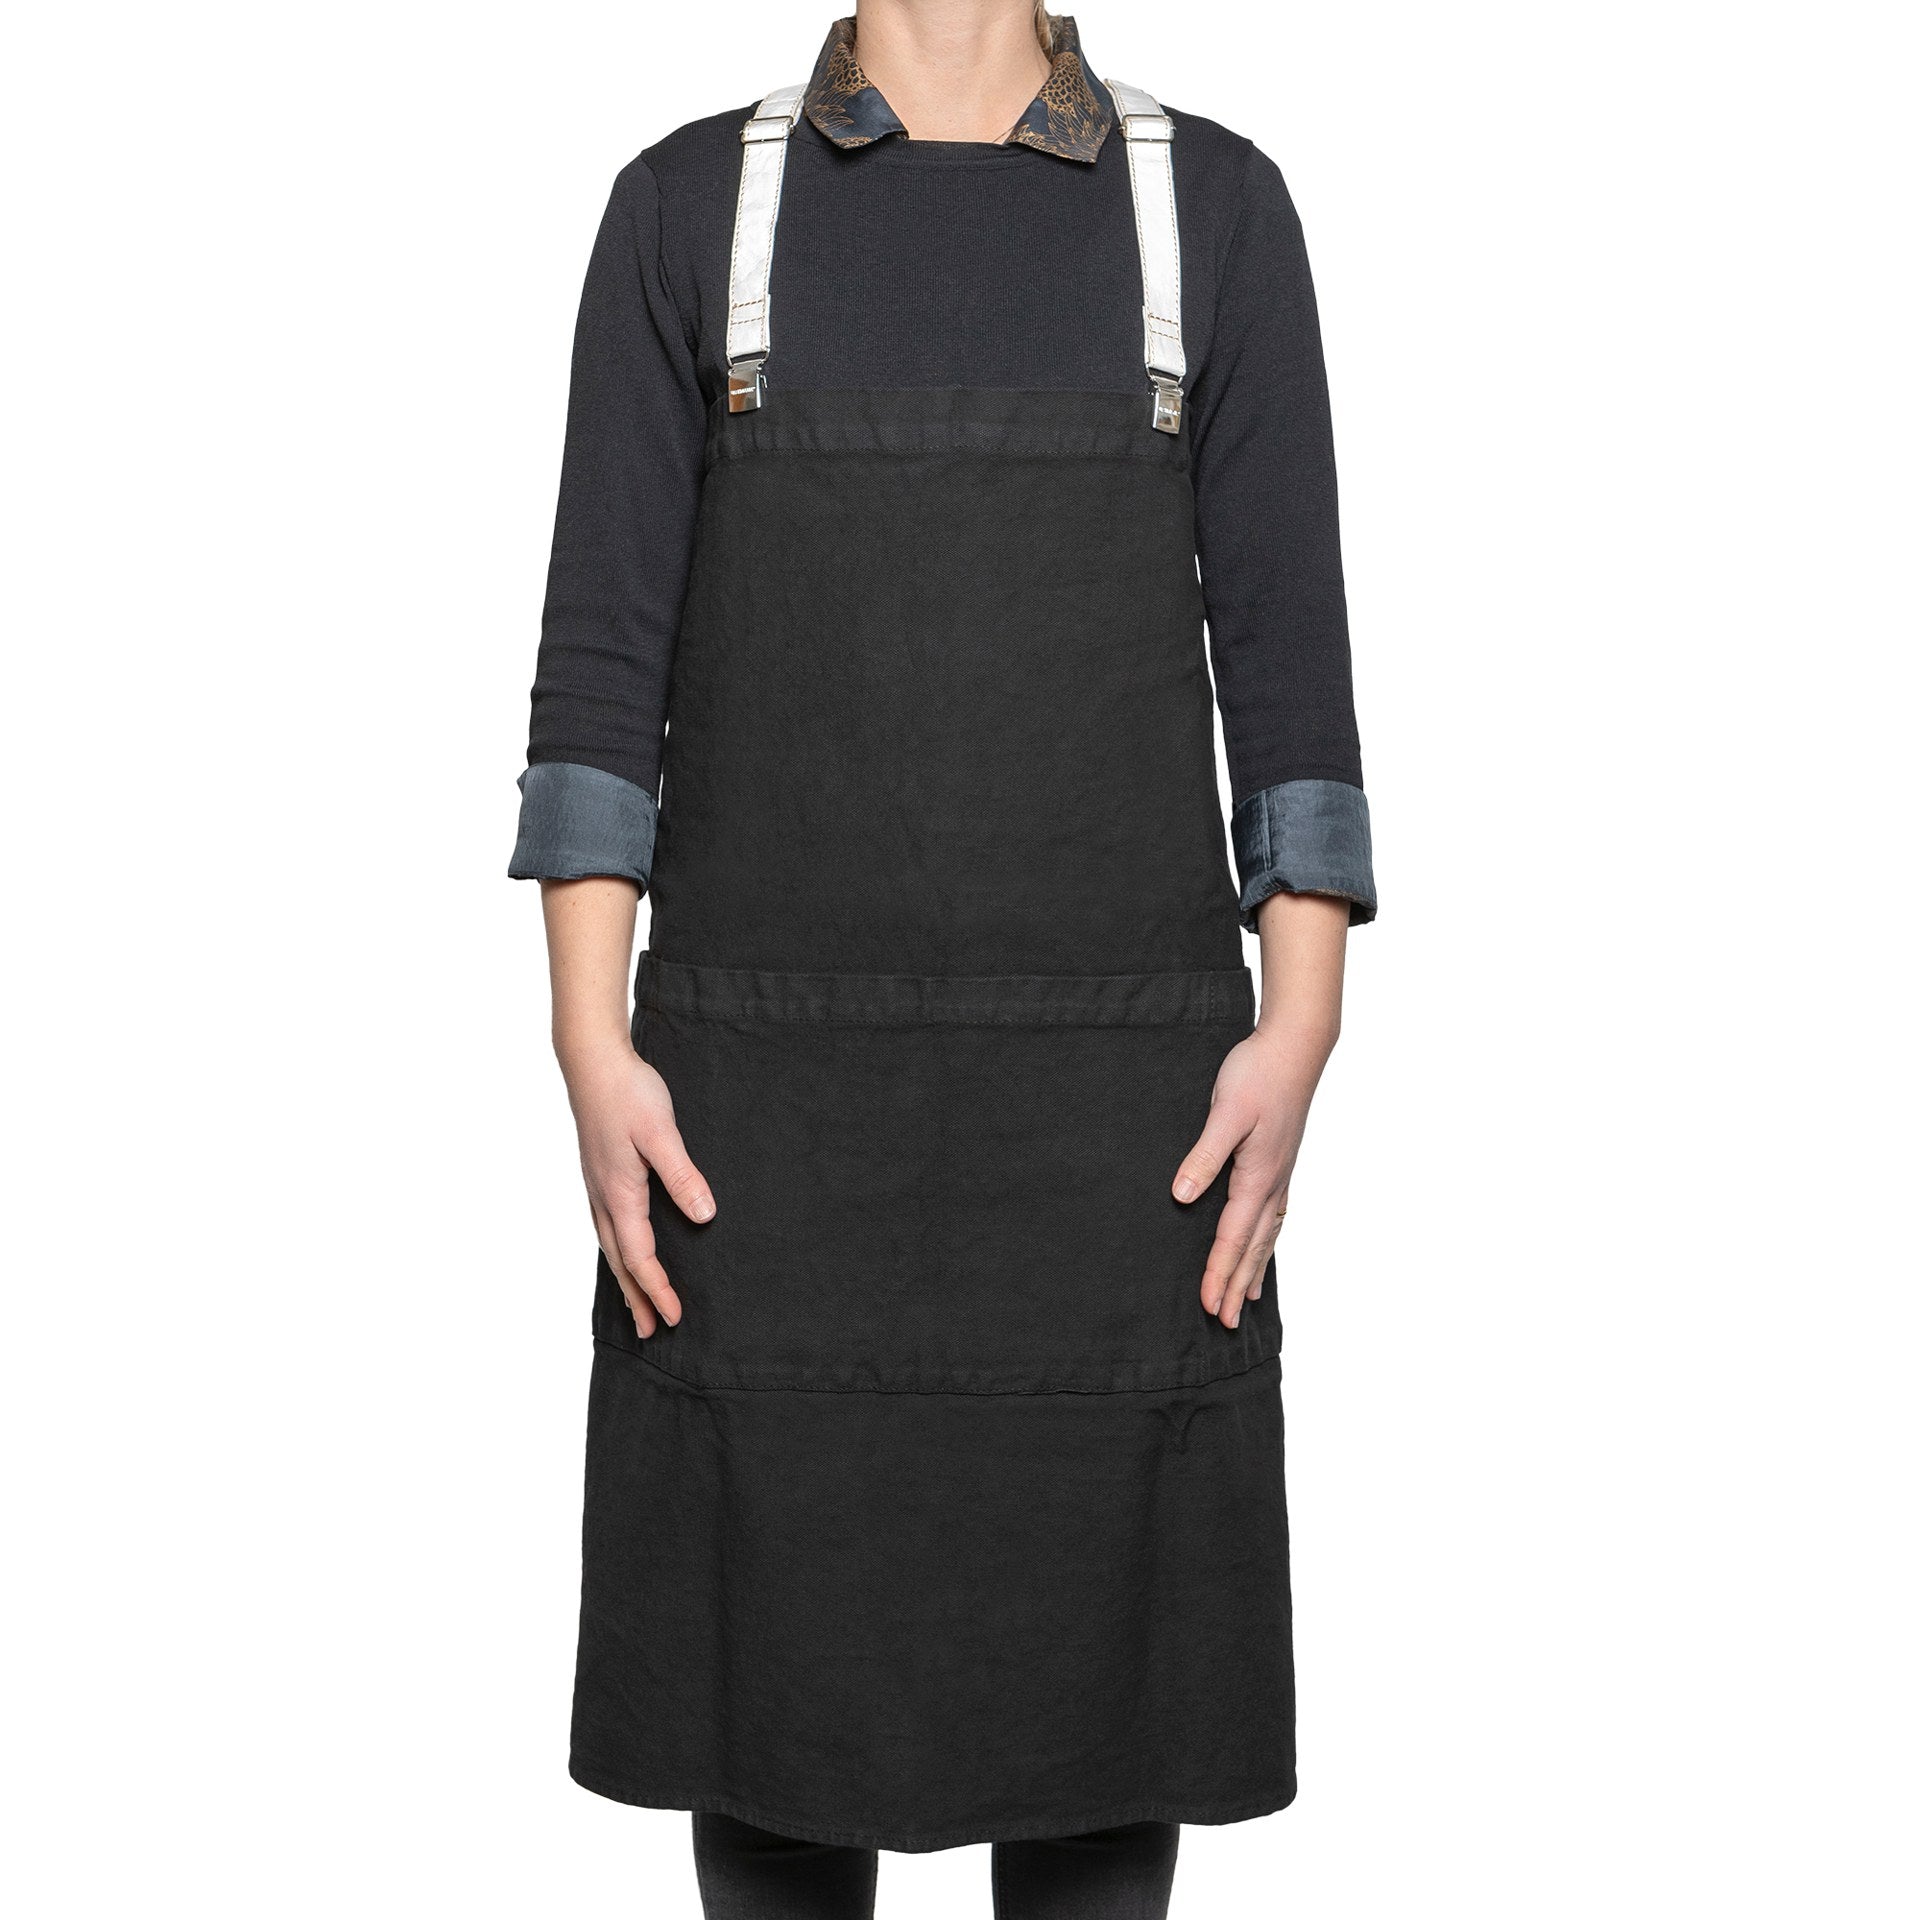 A woman is shown standing in a cotton apron in black. It is fastened with washable paper braces.